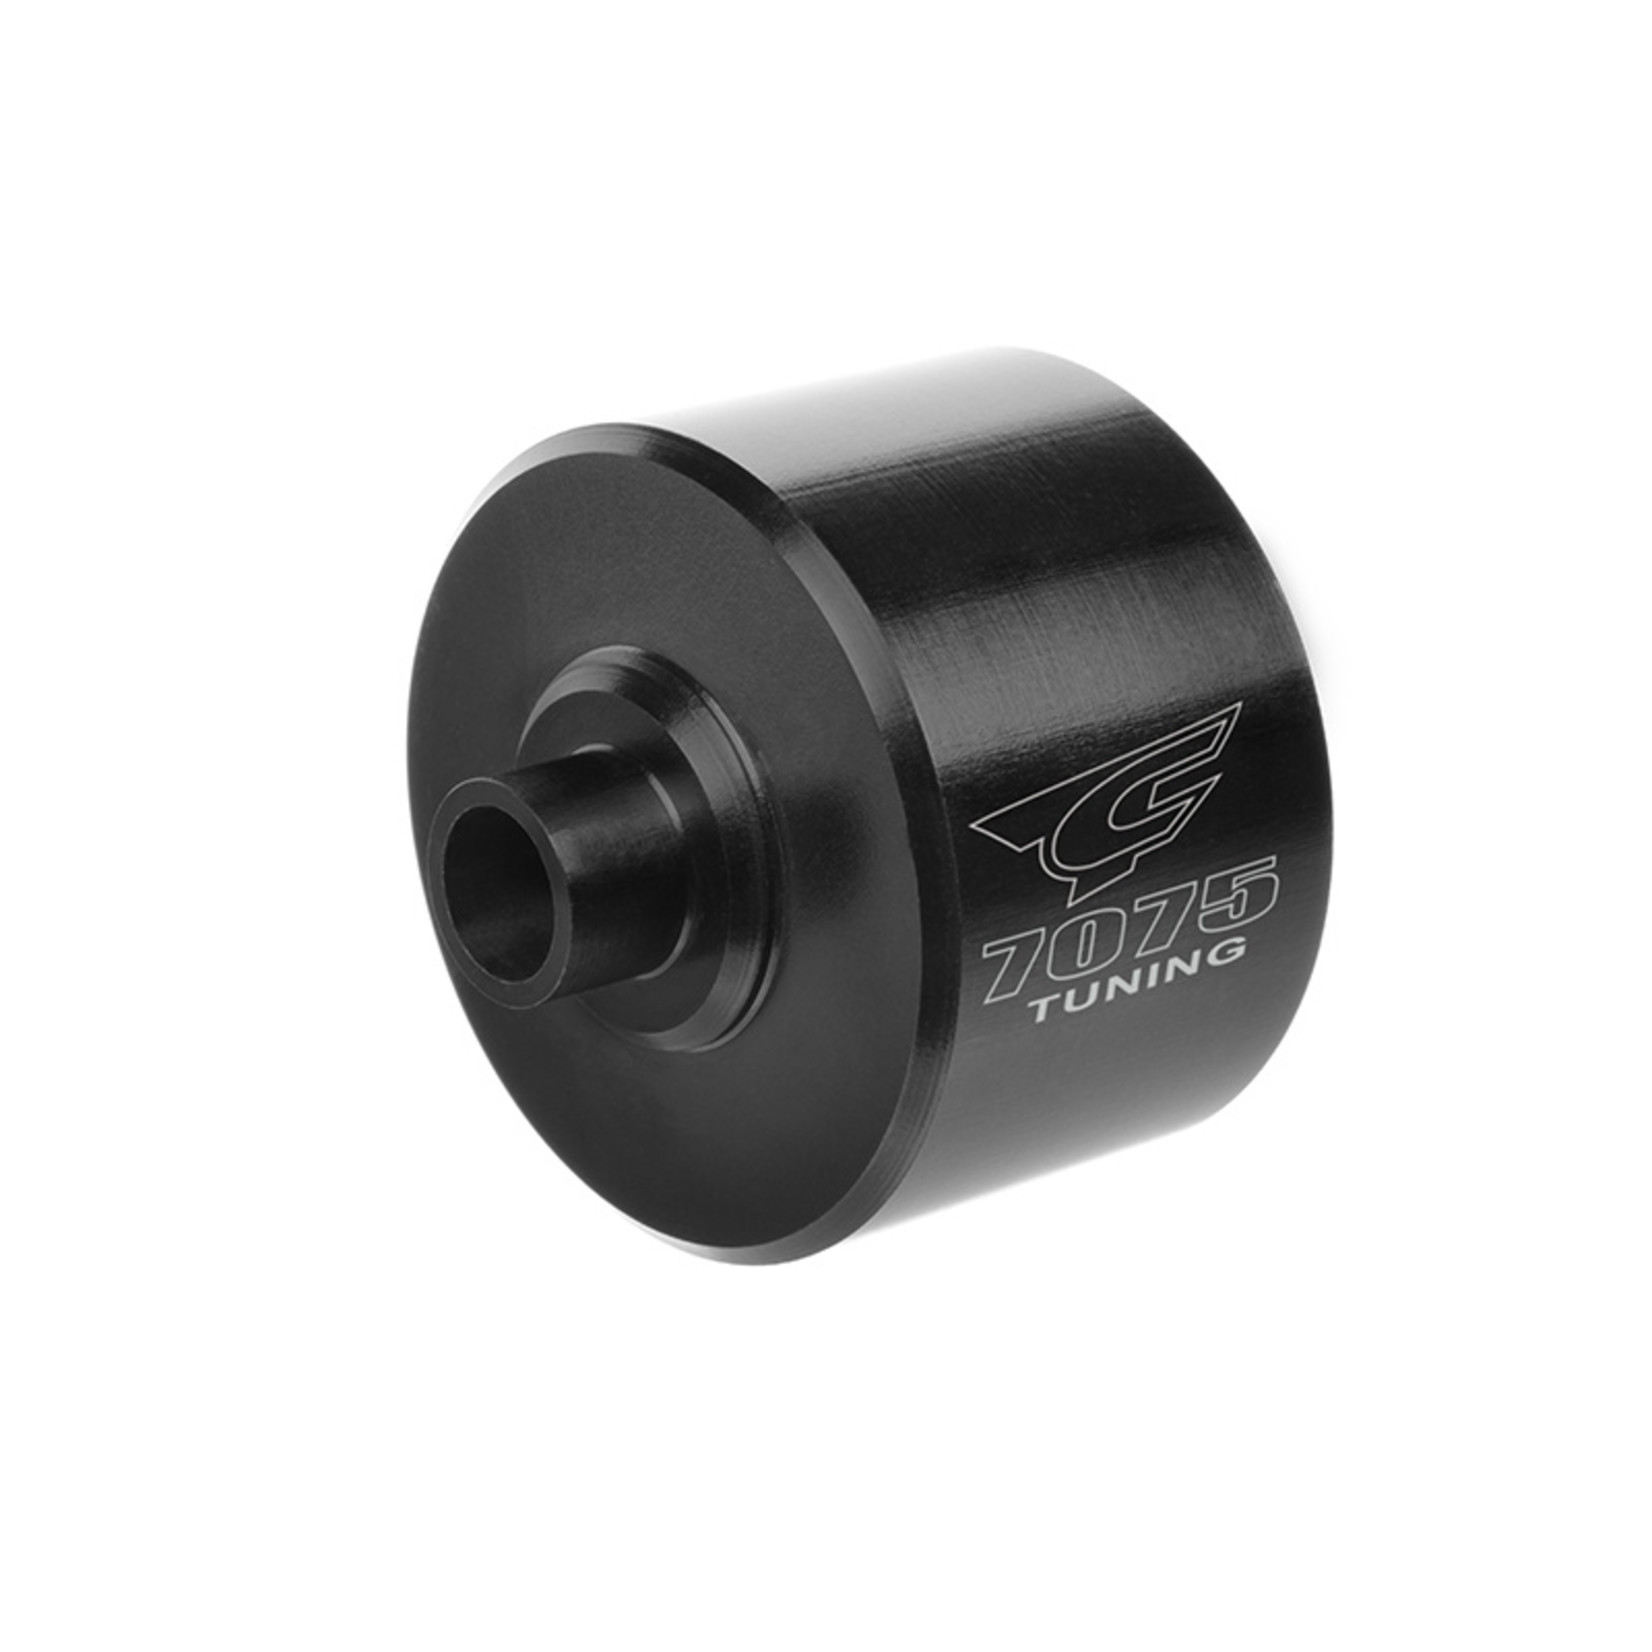 Corally (Team Corally) C-00180-411 Team Corally Xtreme Diff Case 35mm Aluminum 7075 Hard